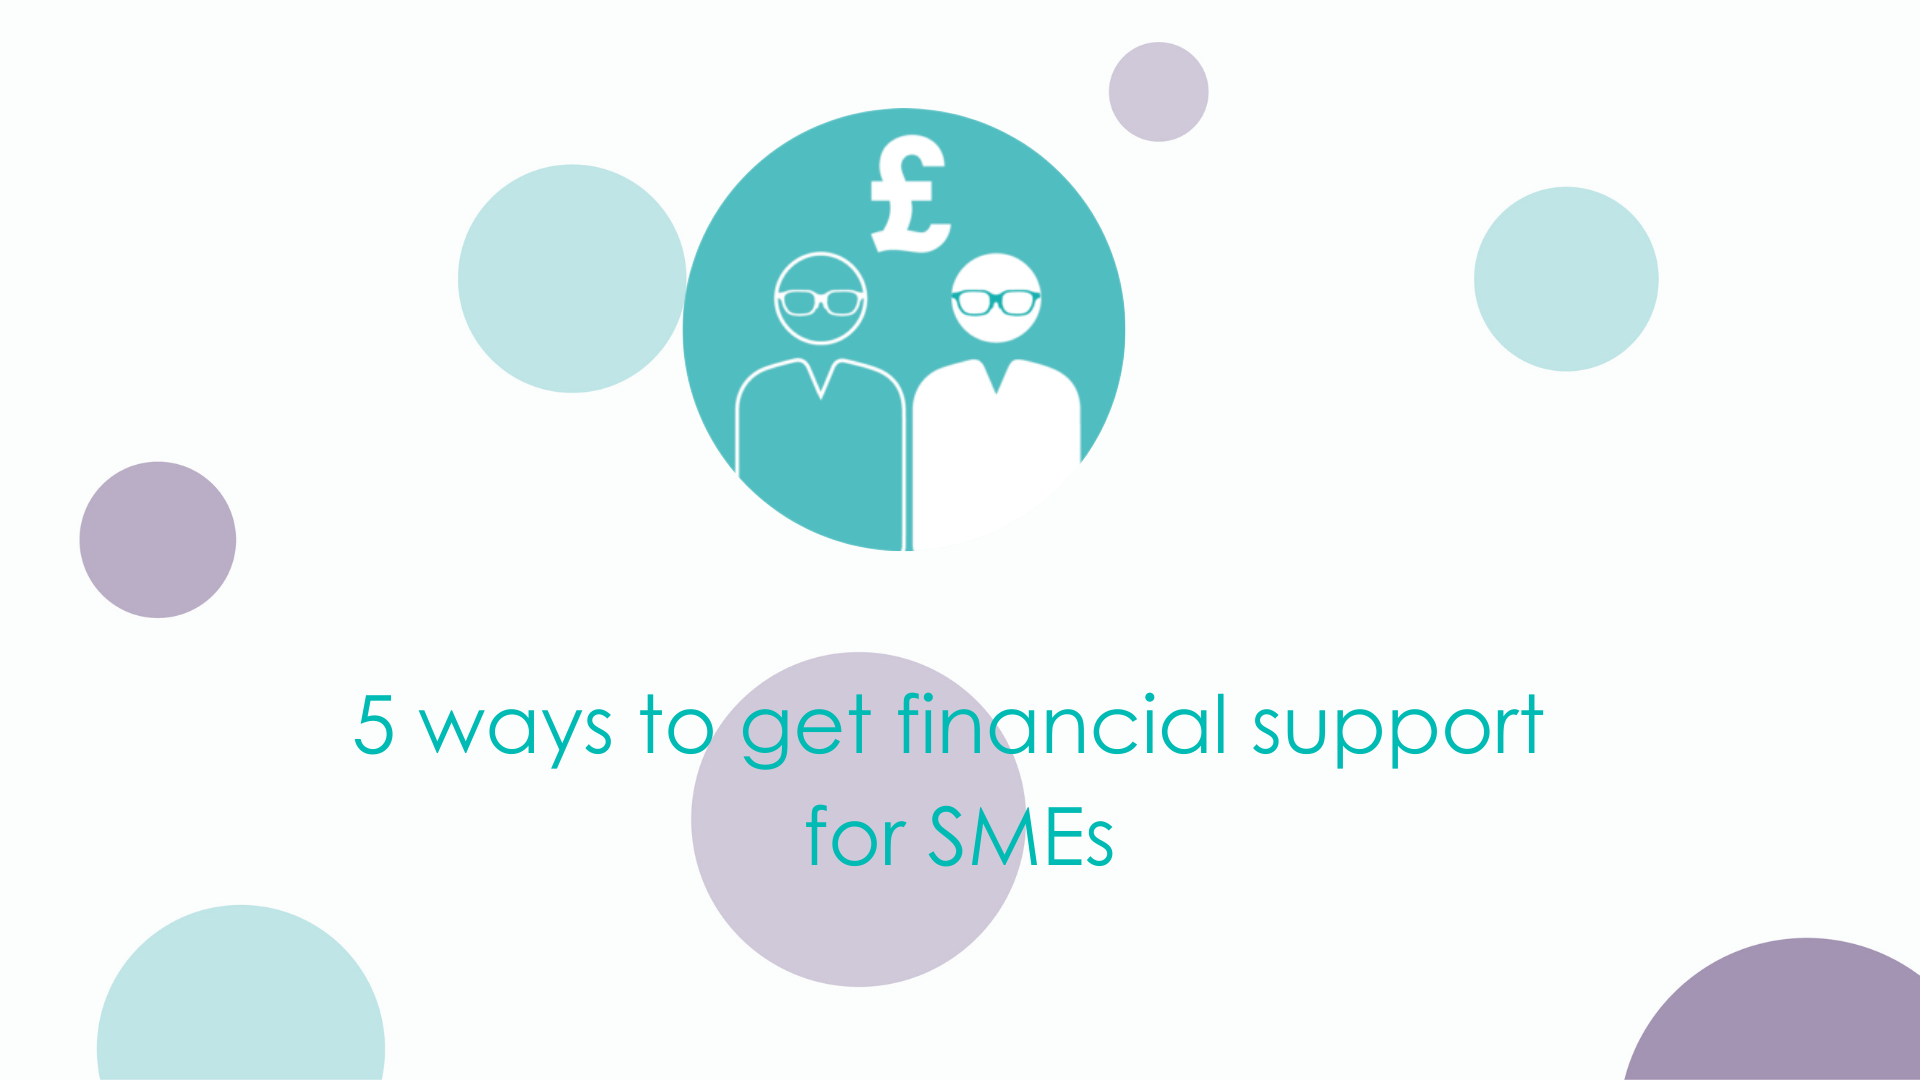 HMRC shares 5 ways you can get financial support for your business